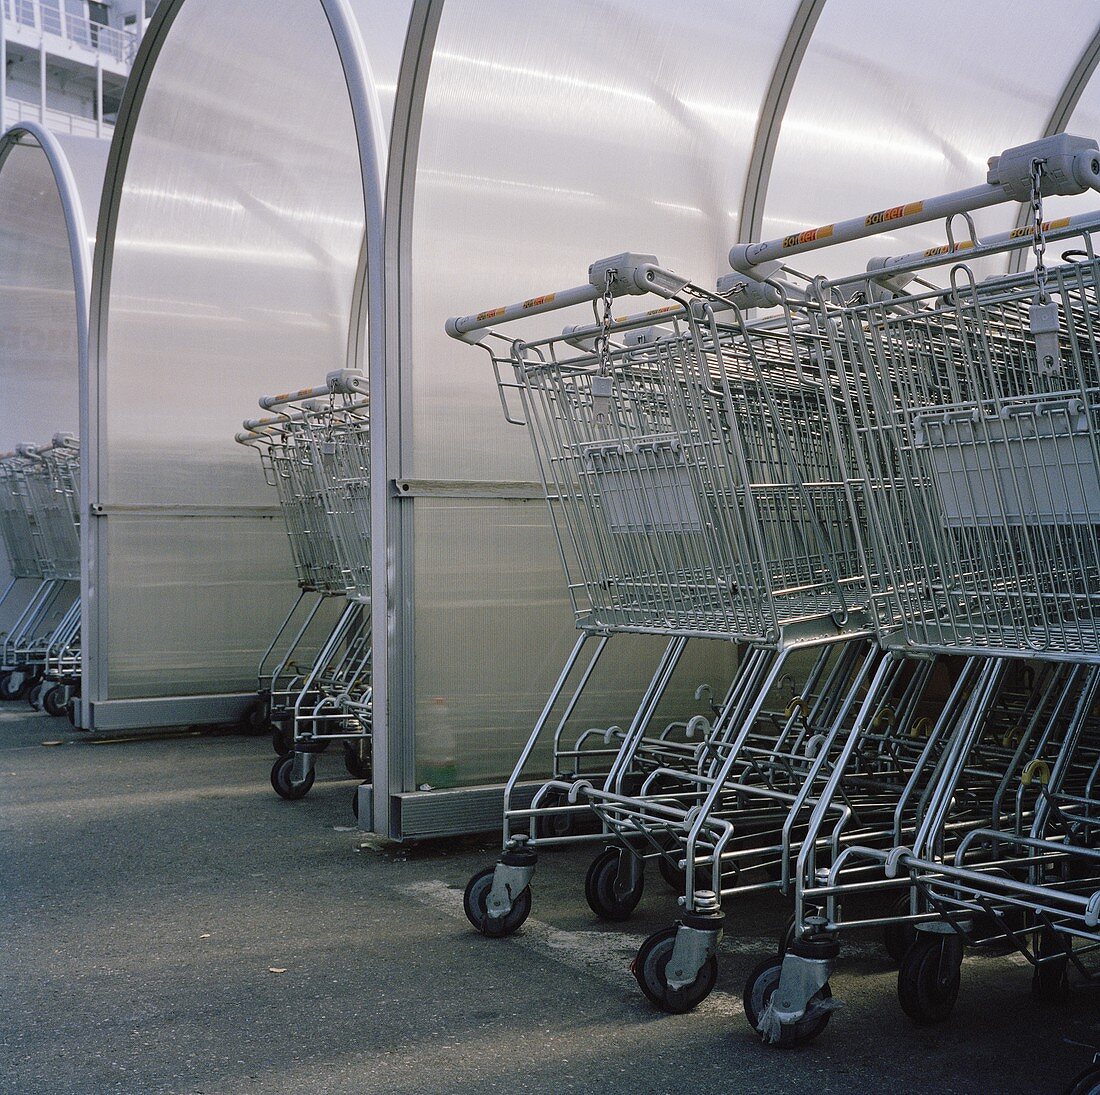 Shopping trolleys at a supermarket